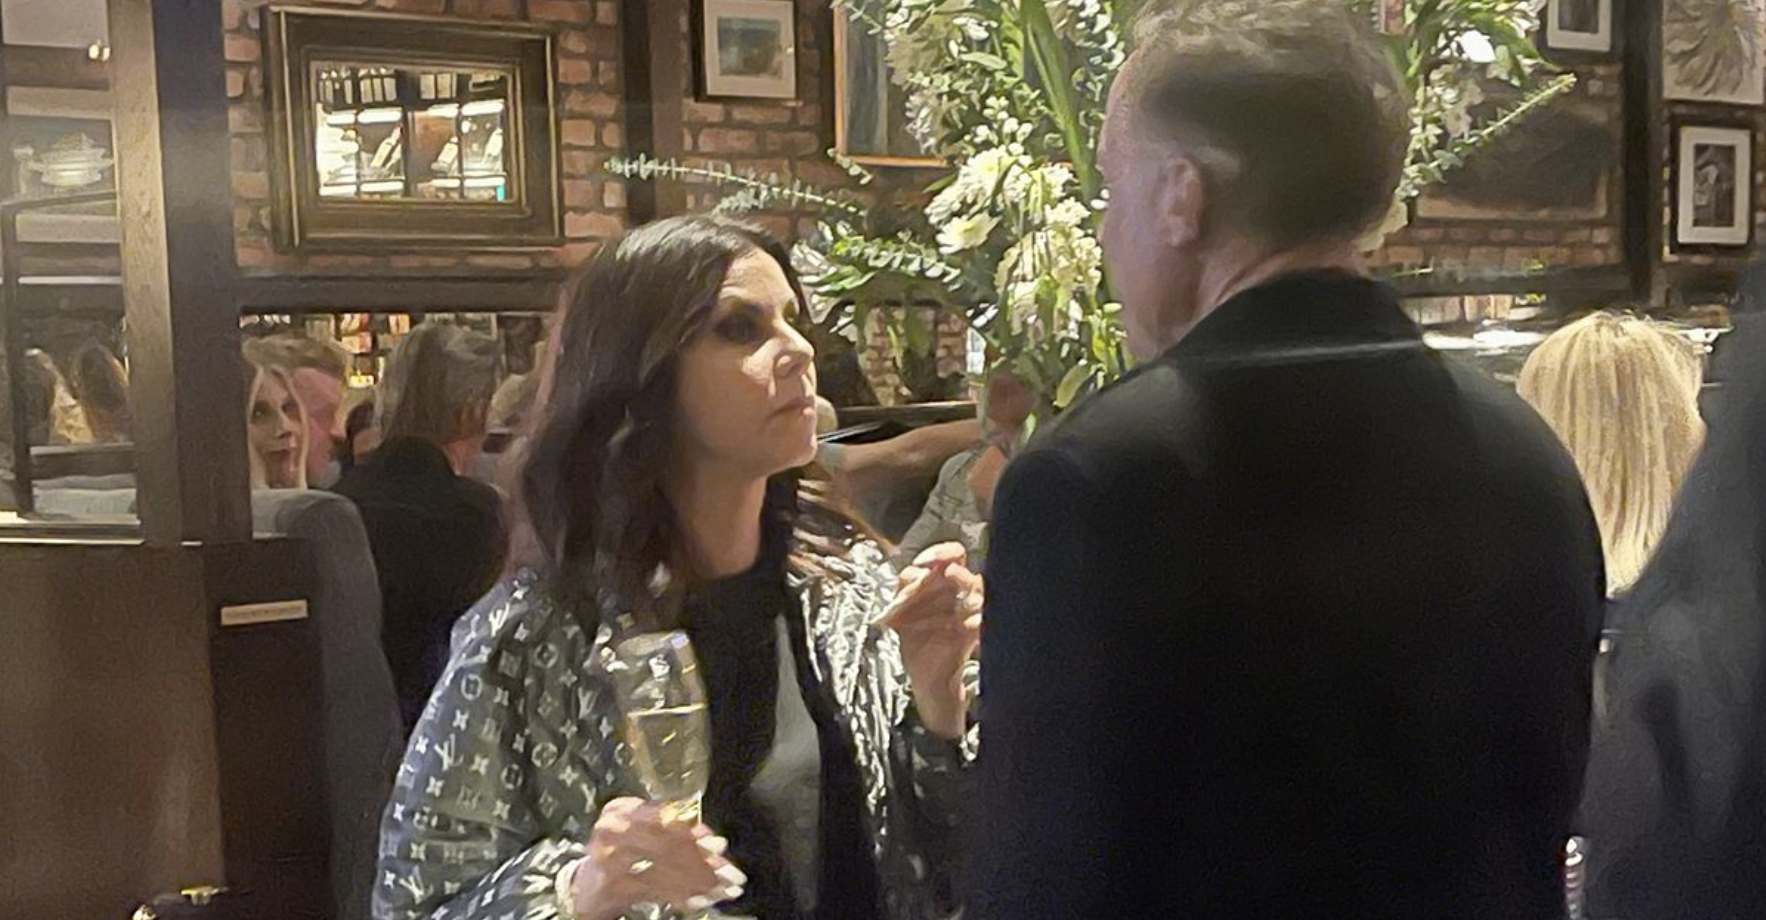 Heather Dubrow and Husband Address Arguing In Public Amid Affair Rumors